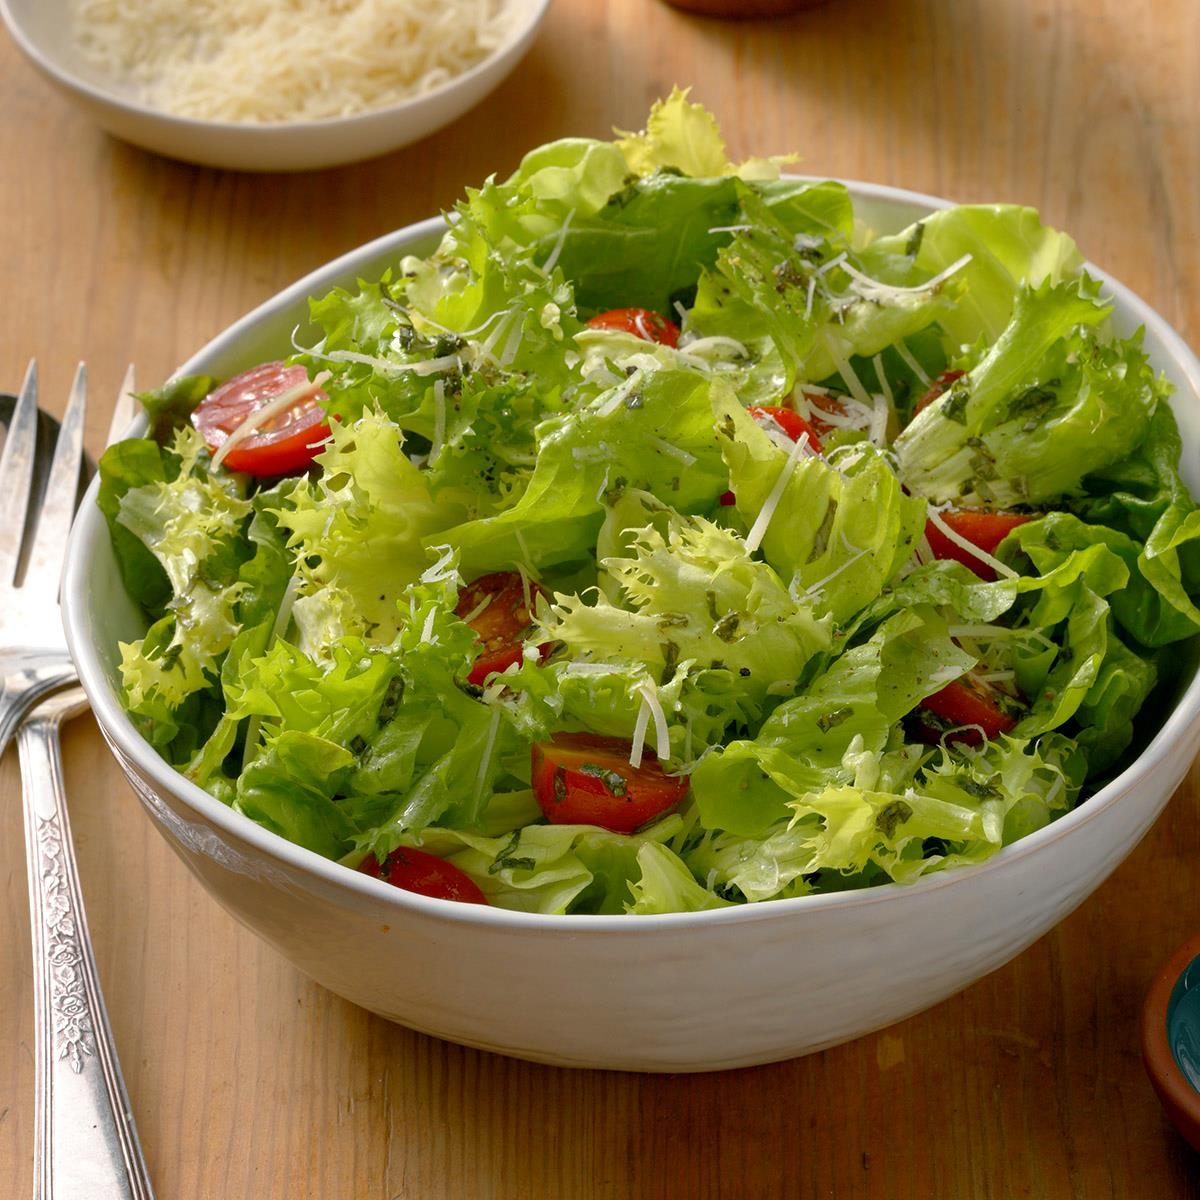 Simple Green Salad with Vinaigrette dressing - Nicky's Kitchen Sanctuary